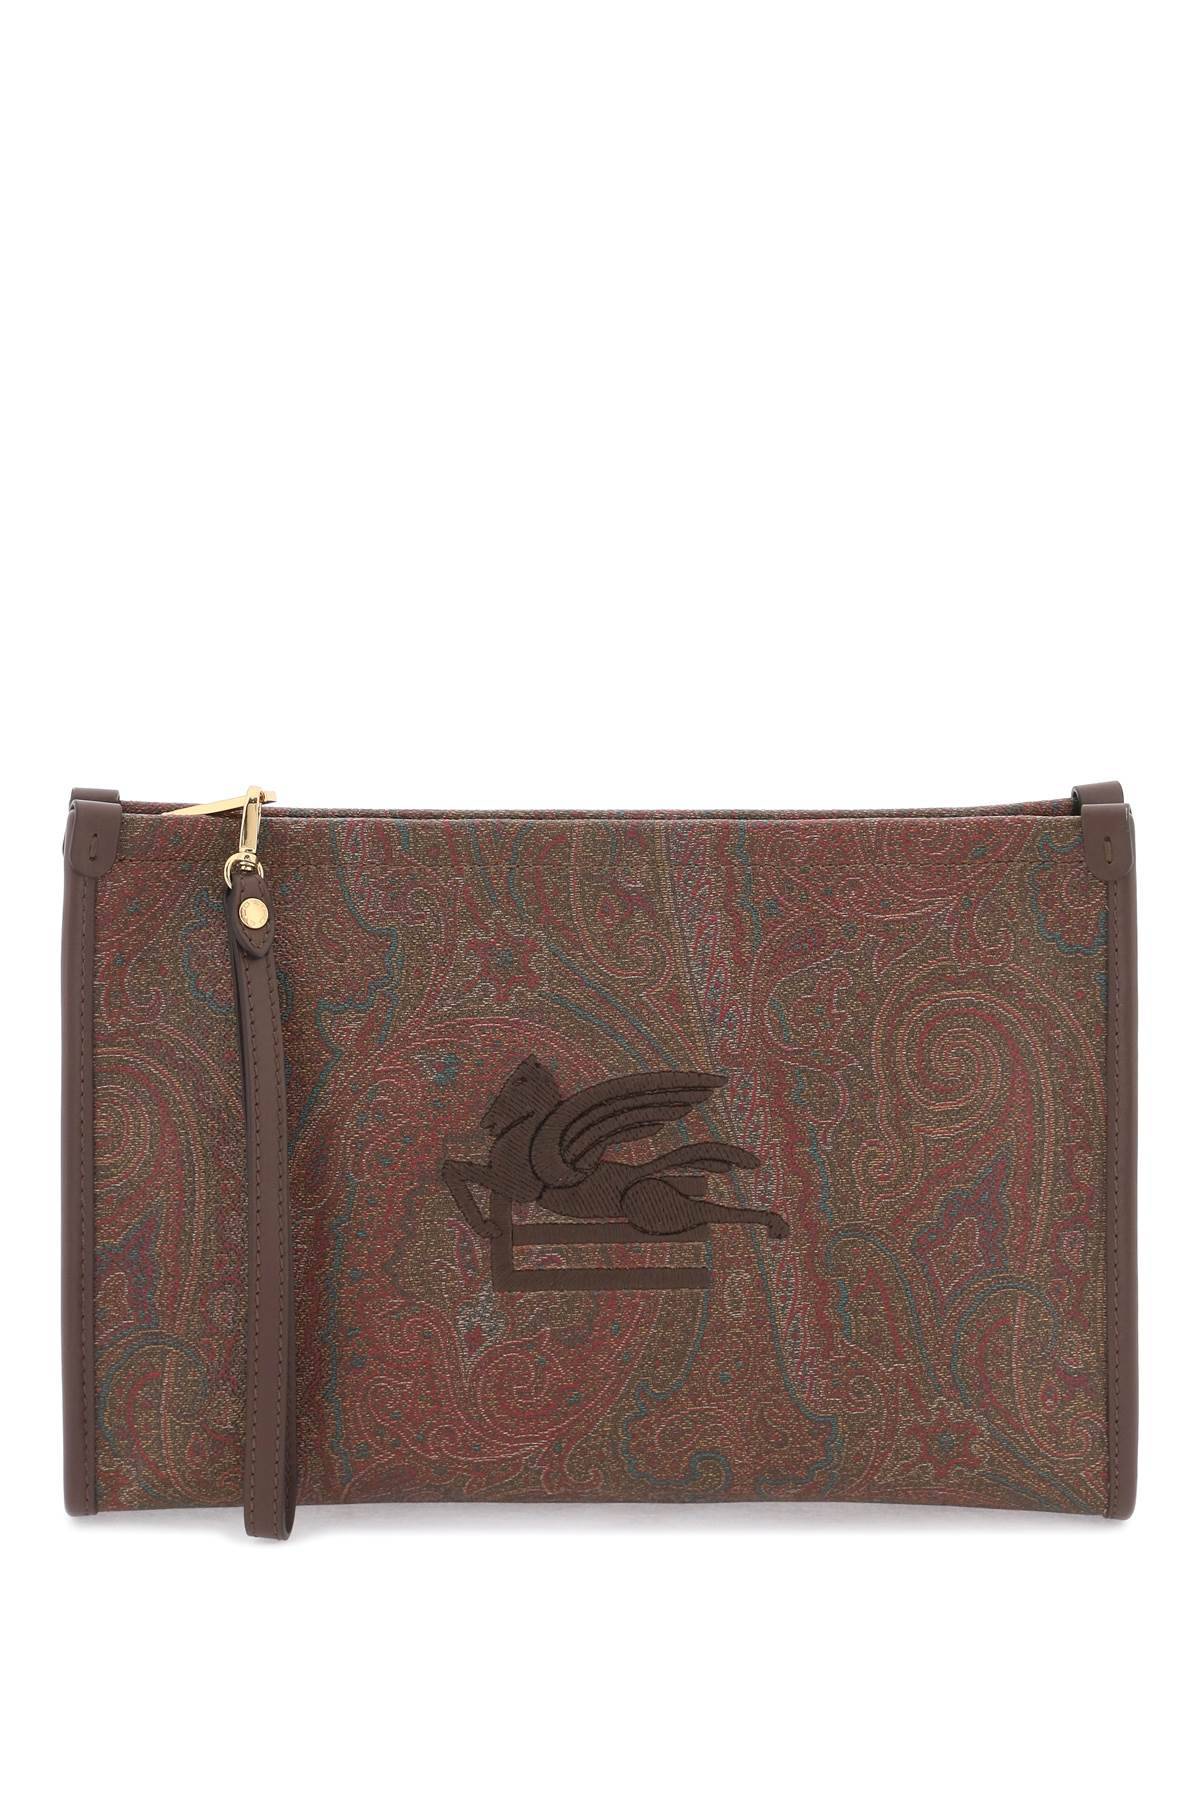 Etro ETRO paisley pouch with embroidery